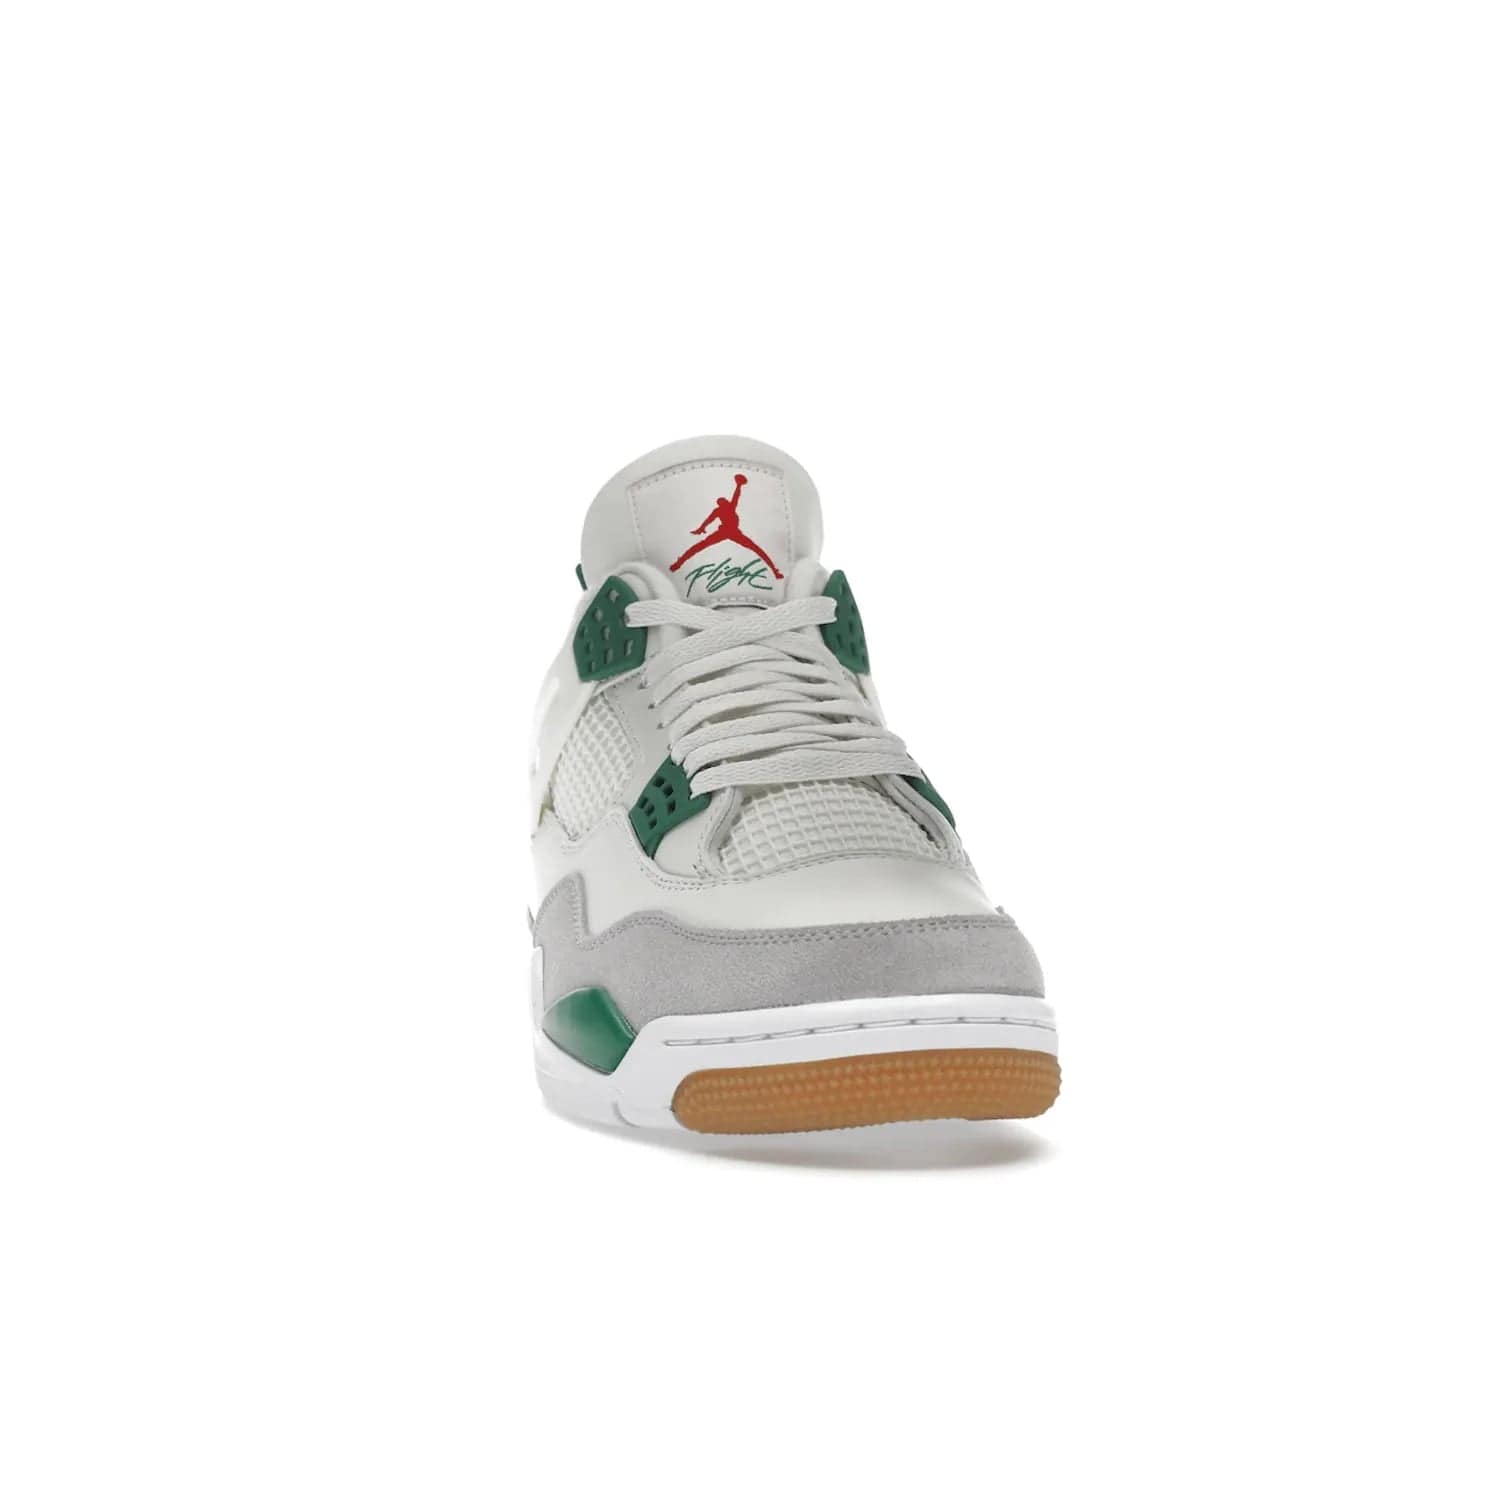 Jordan 4 Retro SB Pine Green - Image 9 - Only at www.BallersClubKickz.com - A white leather upper combined with a Neutral Grey suede mudguard gives this limited Air Jordan 4 Retro SB Pine Green sneaker its unmistakable style. Released March 20, 2023, the Jordan 4 Retro SB features a white and Pine Green midsole plus a red air unit with a gum outsole for grip. The perfect blend of Nike SB skateboarding and Jordan 4 classic design.